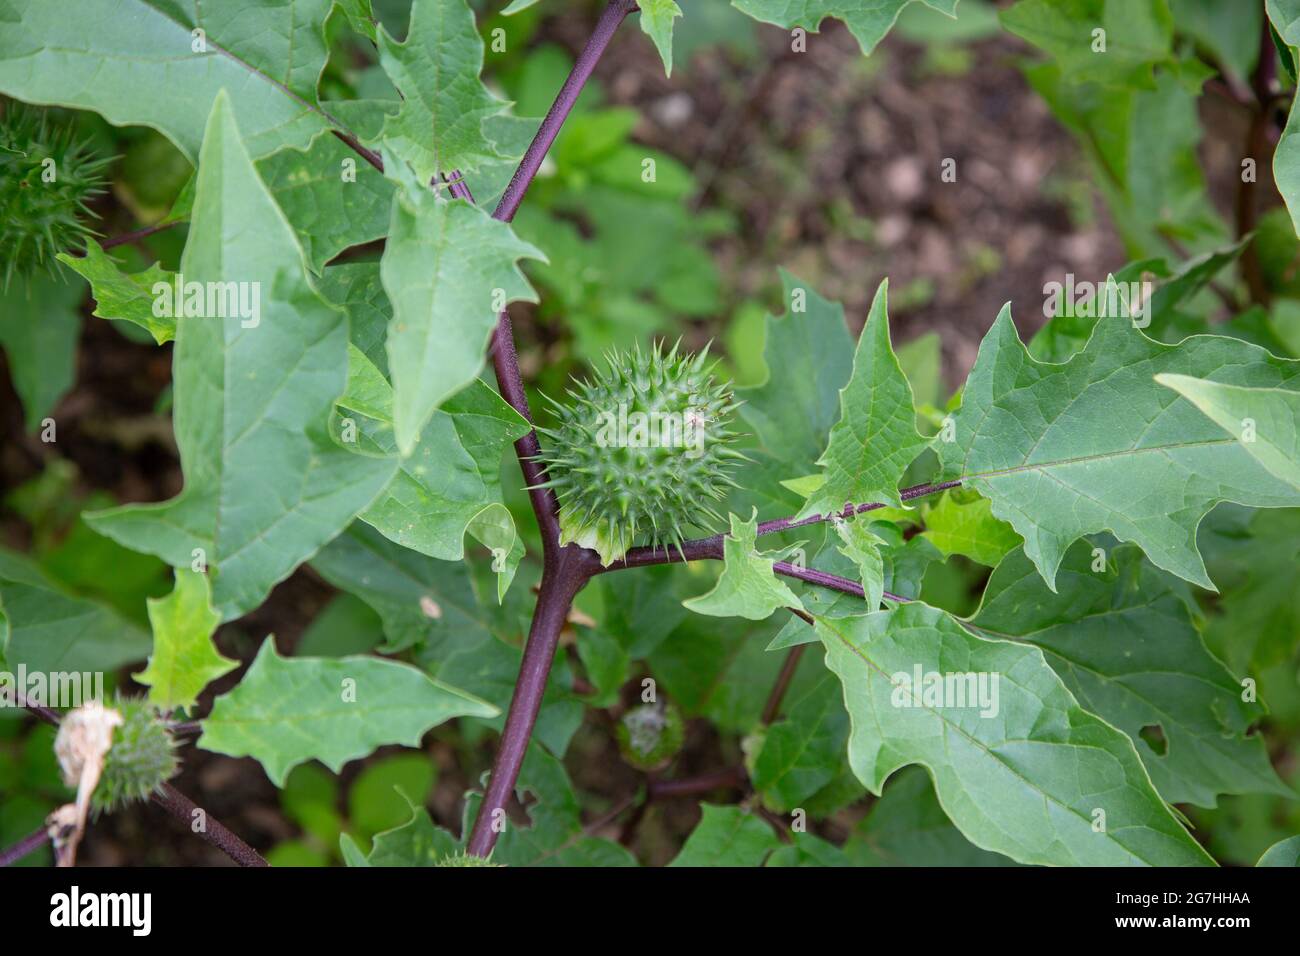 Datura quercifolia, commonly known as the oak-leaved thorn-apple is a small shrub in the genus Datura first described by Alexander von Humboldt in 181 Stock Photo